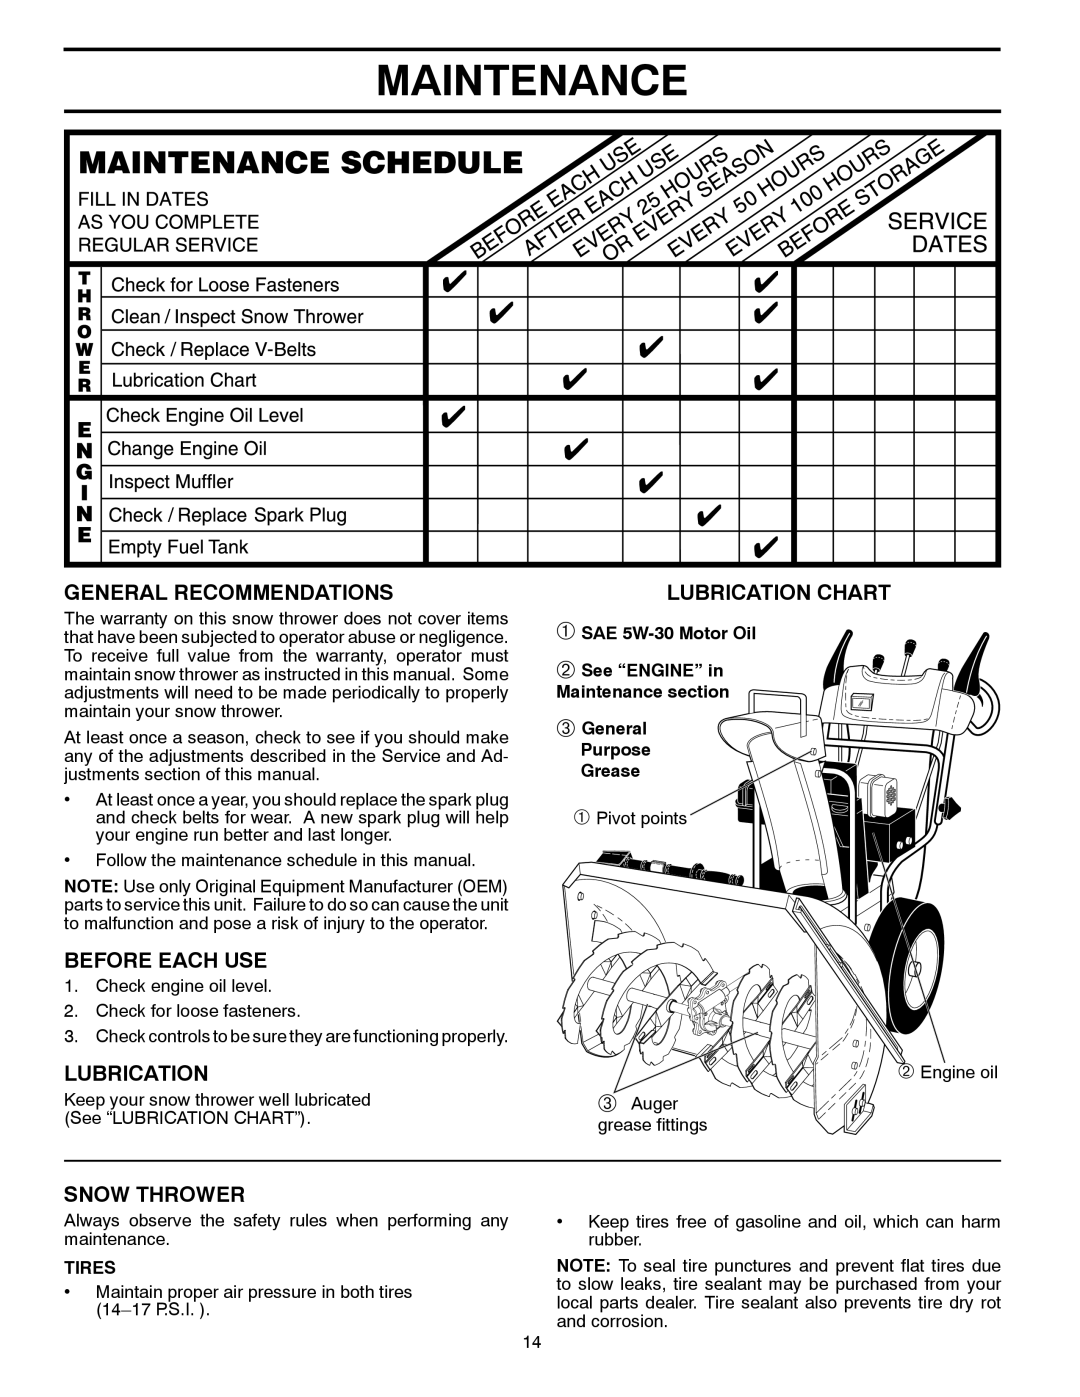 Poulan 435548 Maintenance, General Recommendations, Before Each Use, Snow Thrower, Lubrication Chart, Purpose Grease 